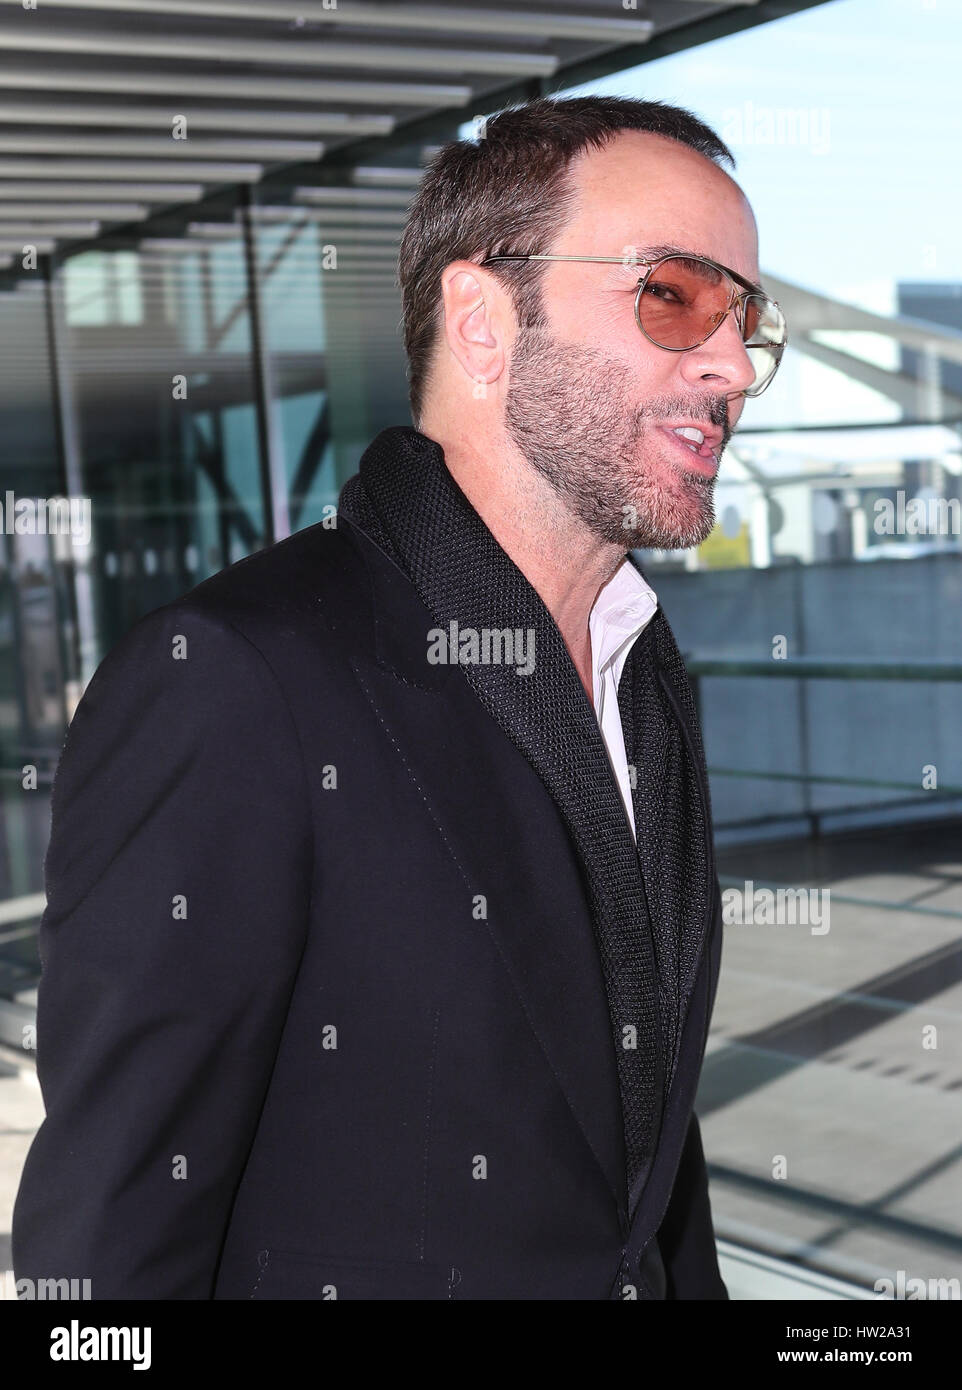 Tom Ford, Sam and Aaron Taylor-Johnson are seen at Heathrow airport after  yesterday's BAFTA Ceremony Featuring: Tom Ford Where: London, United  Kingdom When: 13 Feb 2017 Stock Photo - Alamy